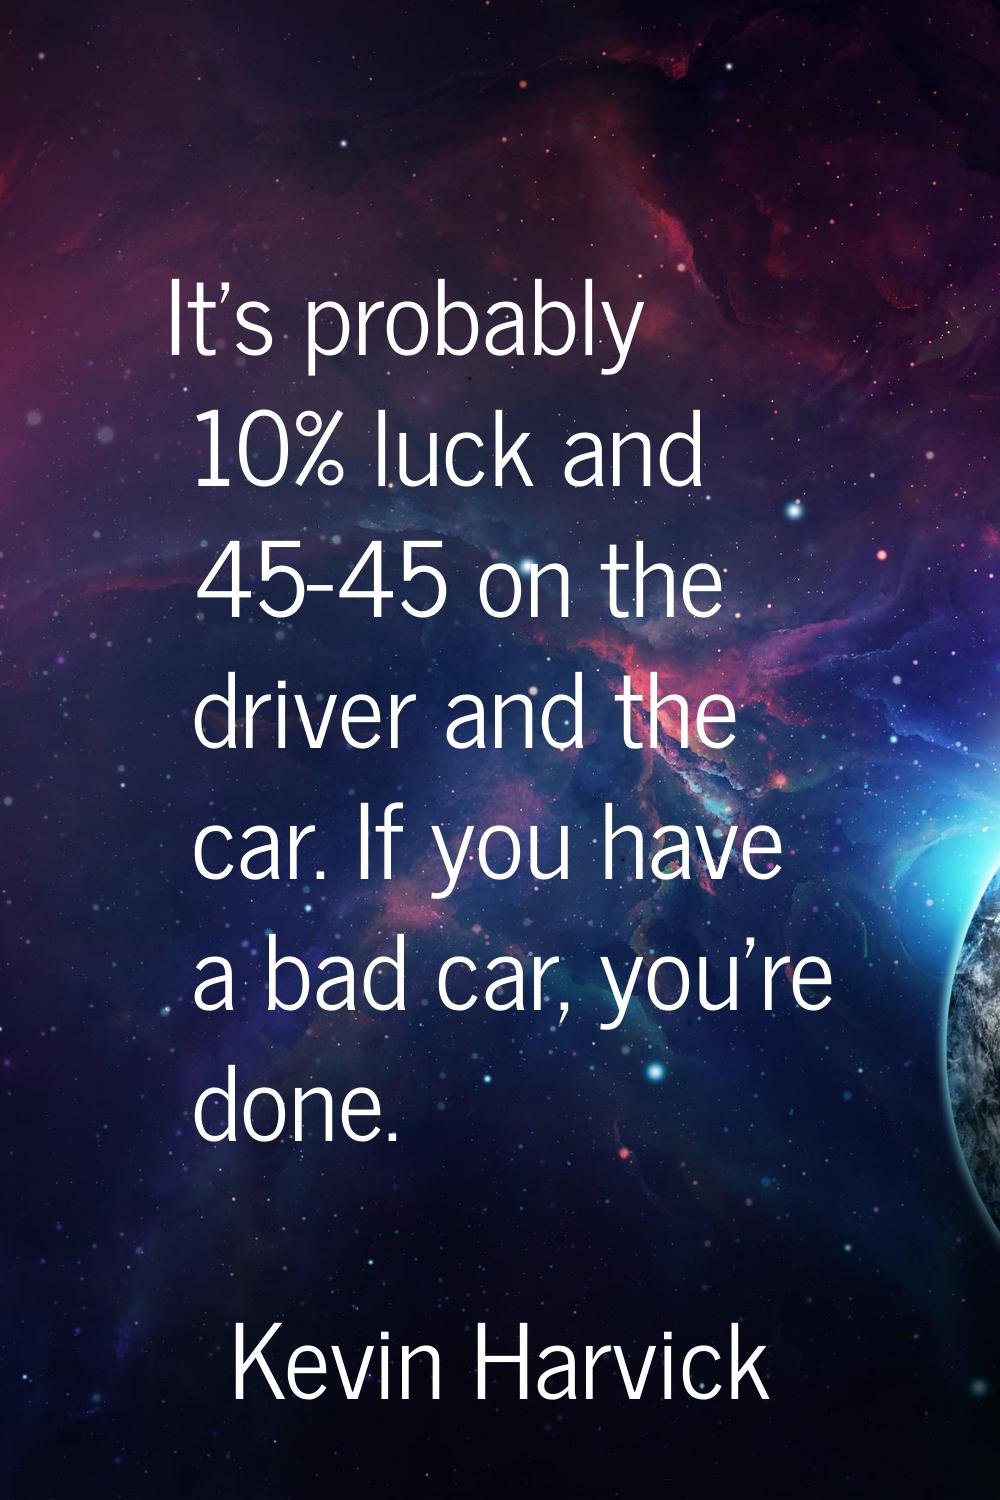 It's probably 10% luck and 45-45 on the driver and the car. If you have a bad car, you're done.